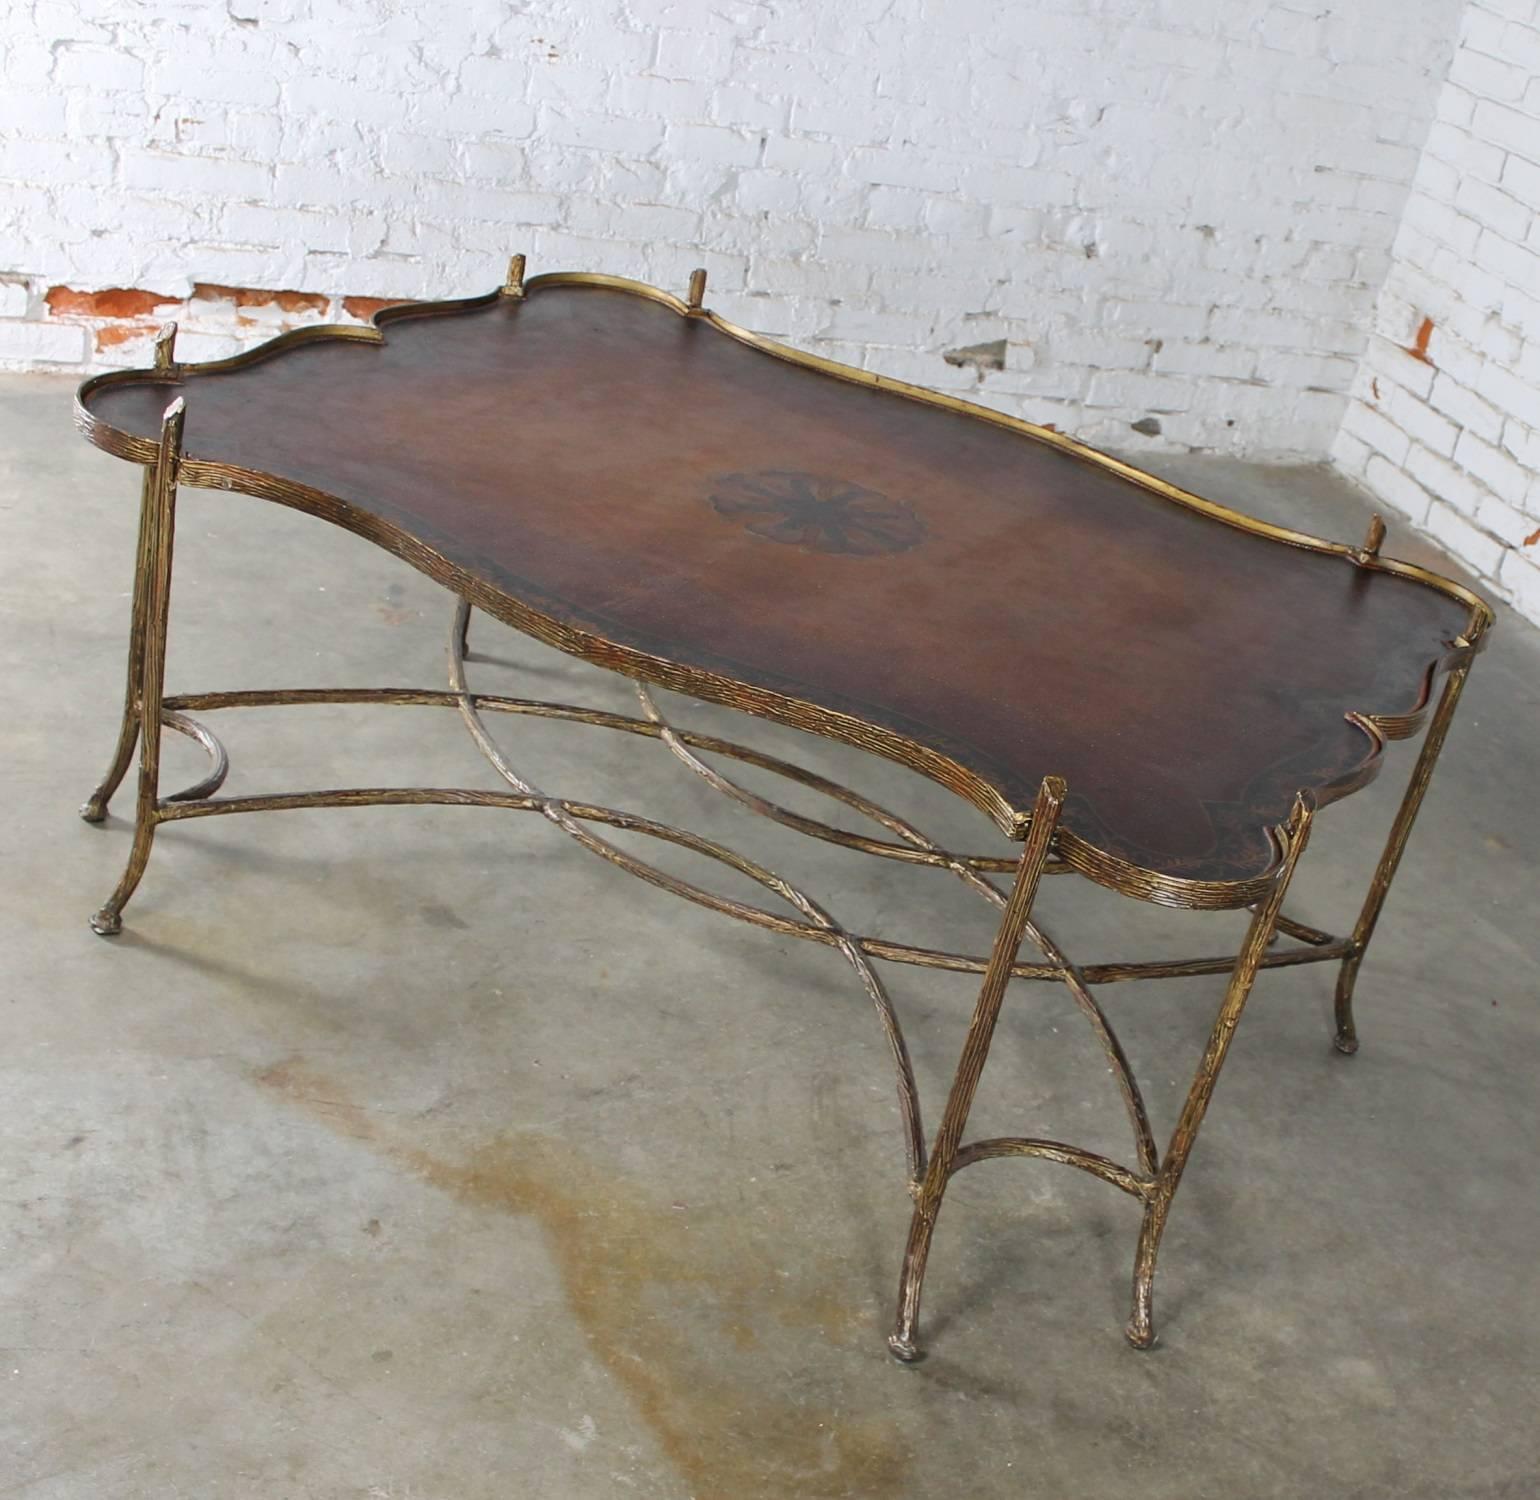 Gorgeous gilded or antique gold finished faux bois iron coffee table in chinoiserie or Hollywood Regency style with tole painted metal tray style top. In fabulous vintage condition, circa 1990.

This stunning gilt iron faux bois coffee table